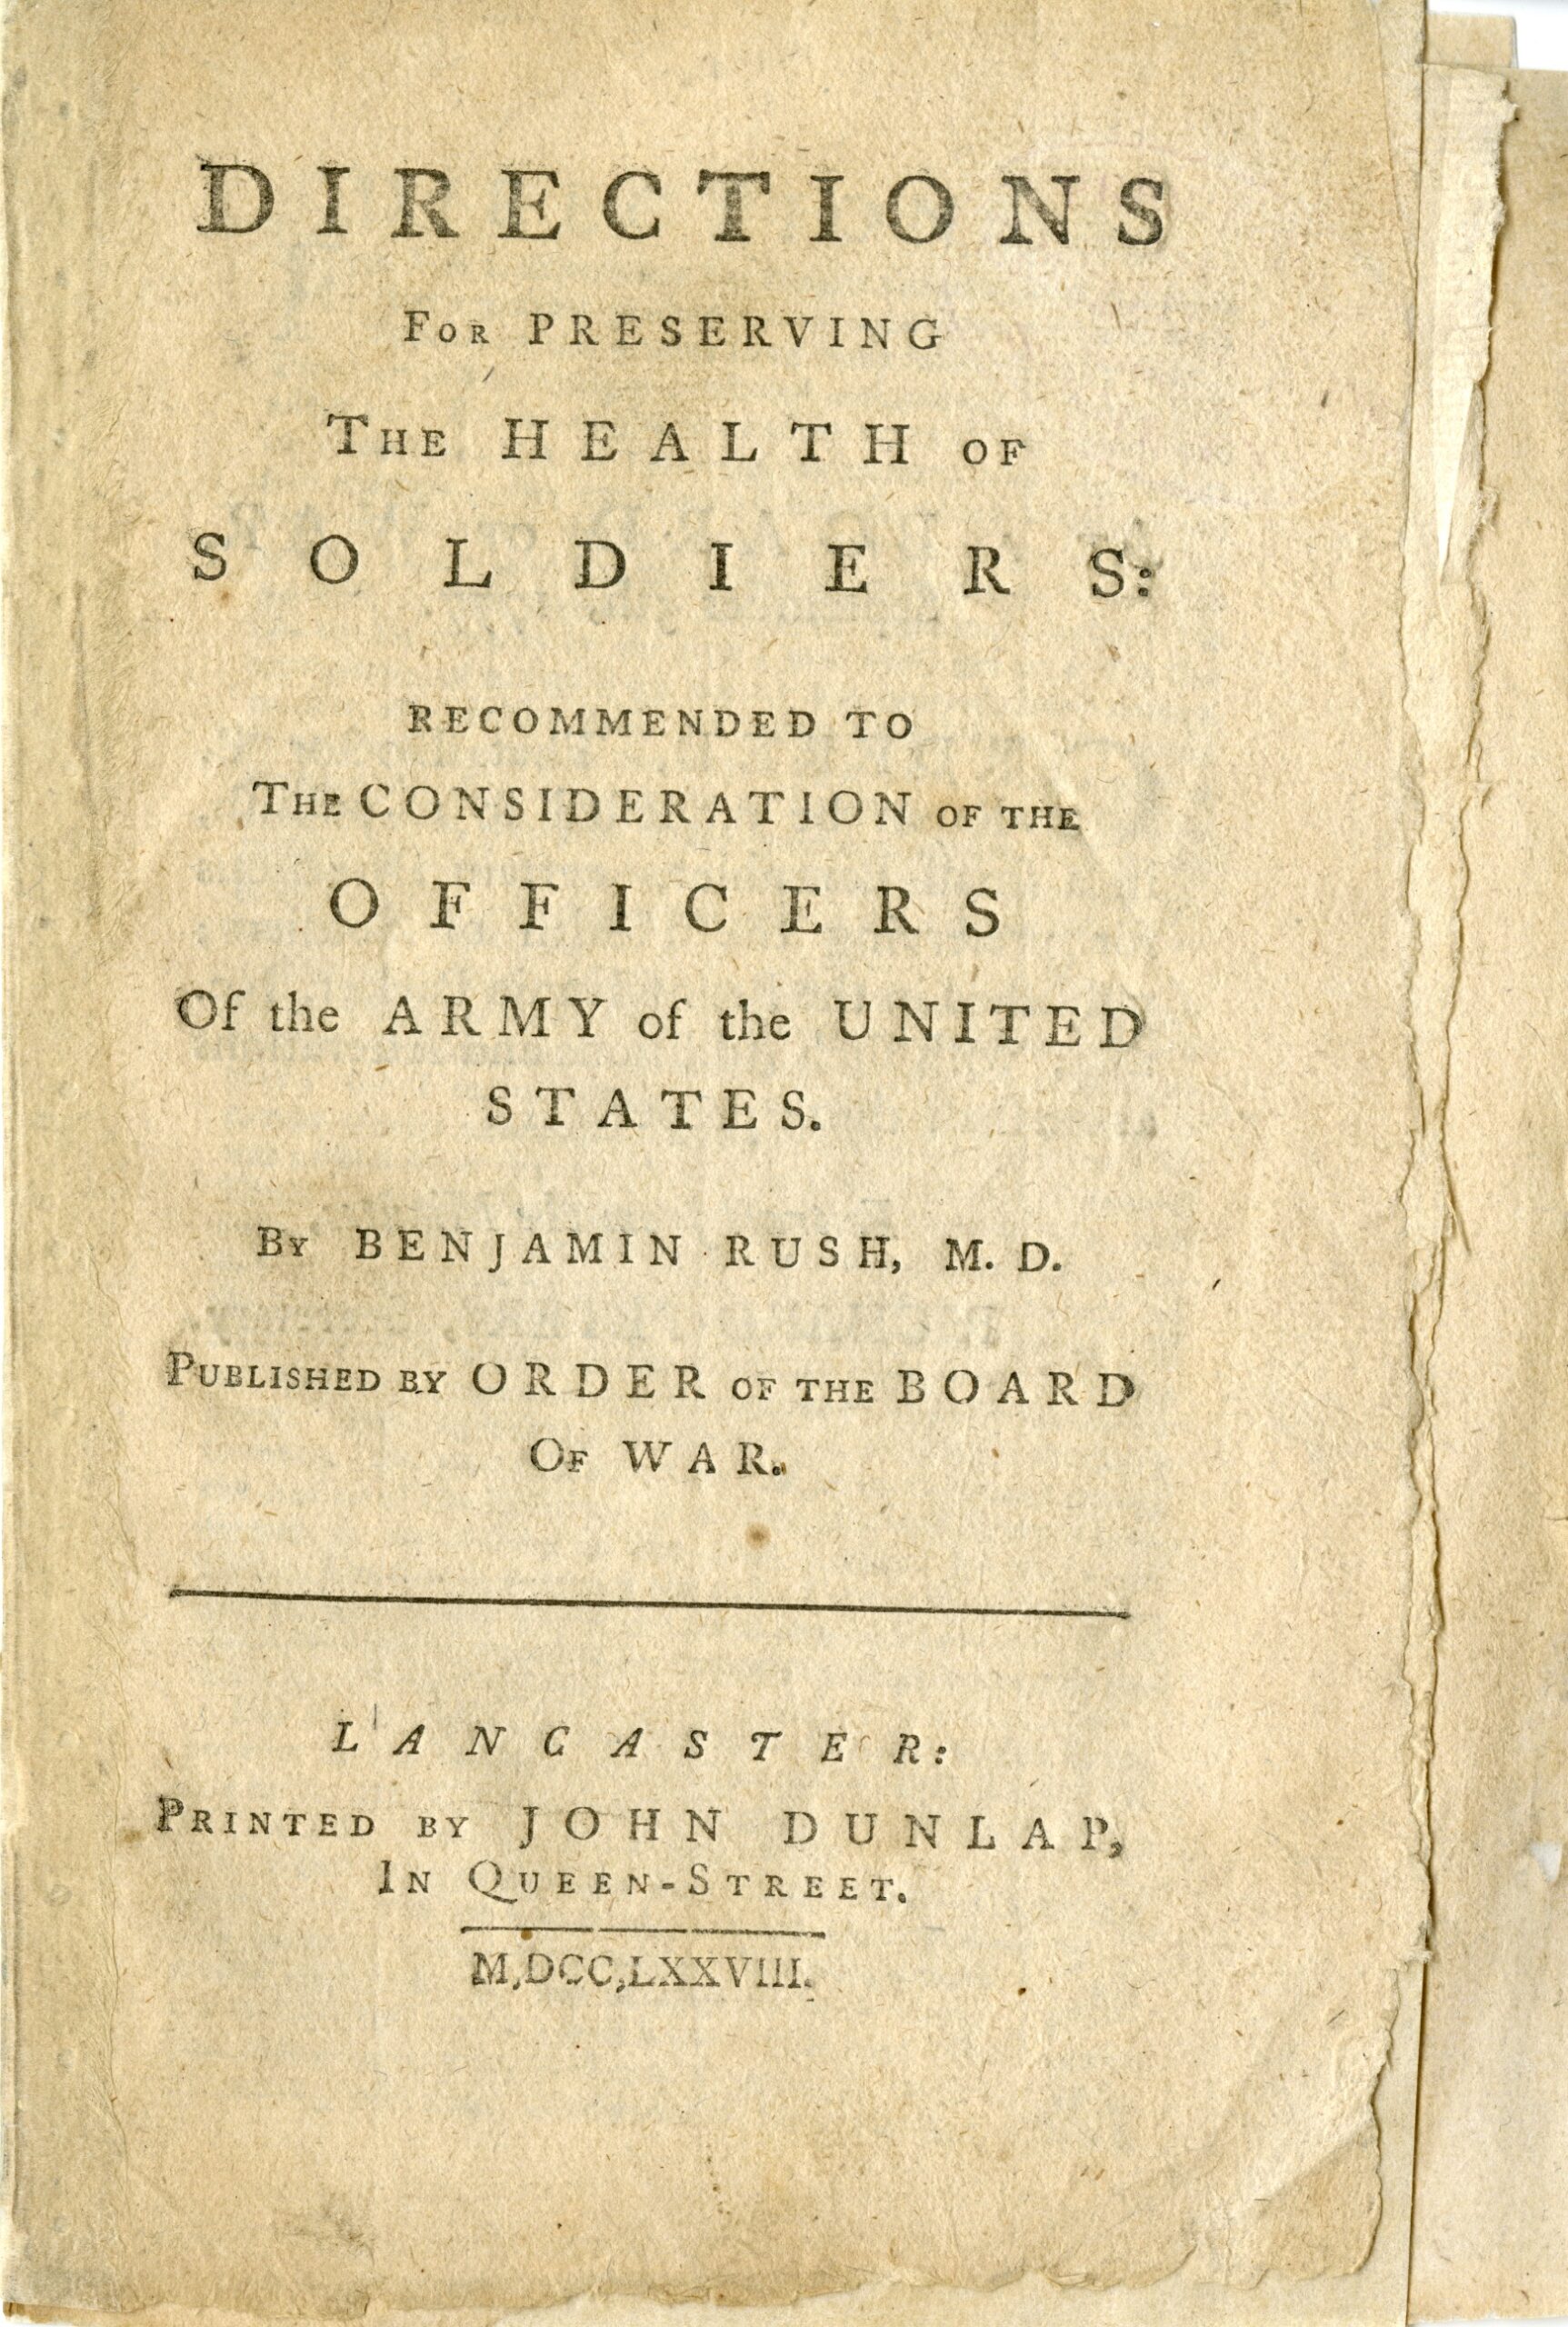 Directions for Preserving the Health of Soldiers by Benjamin Rush, printed by John Dunlap, 1778